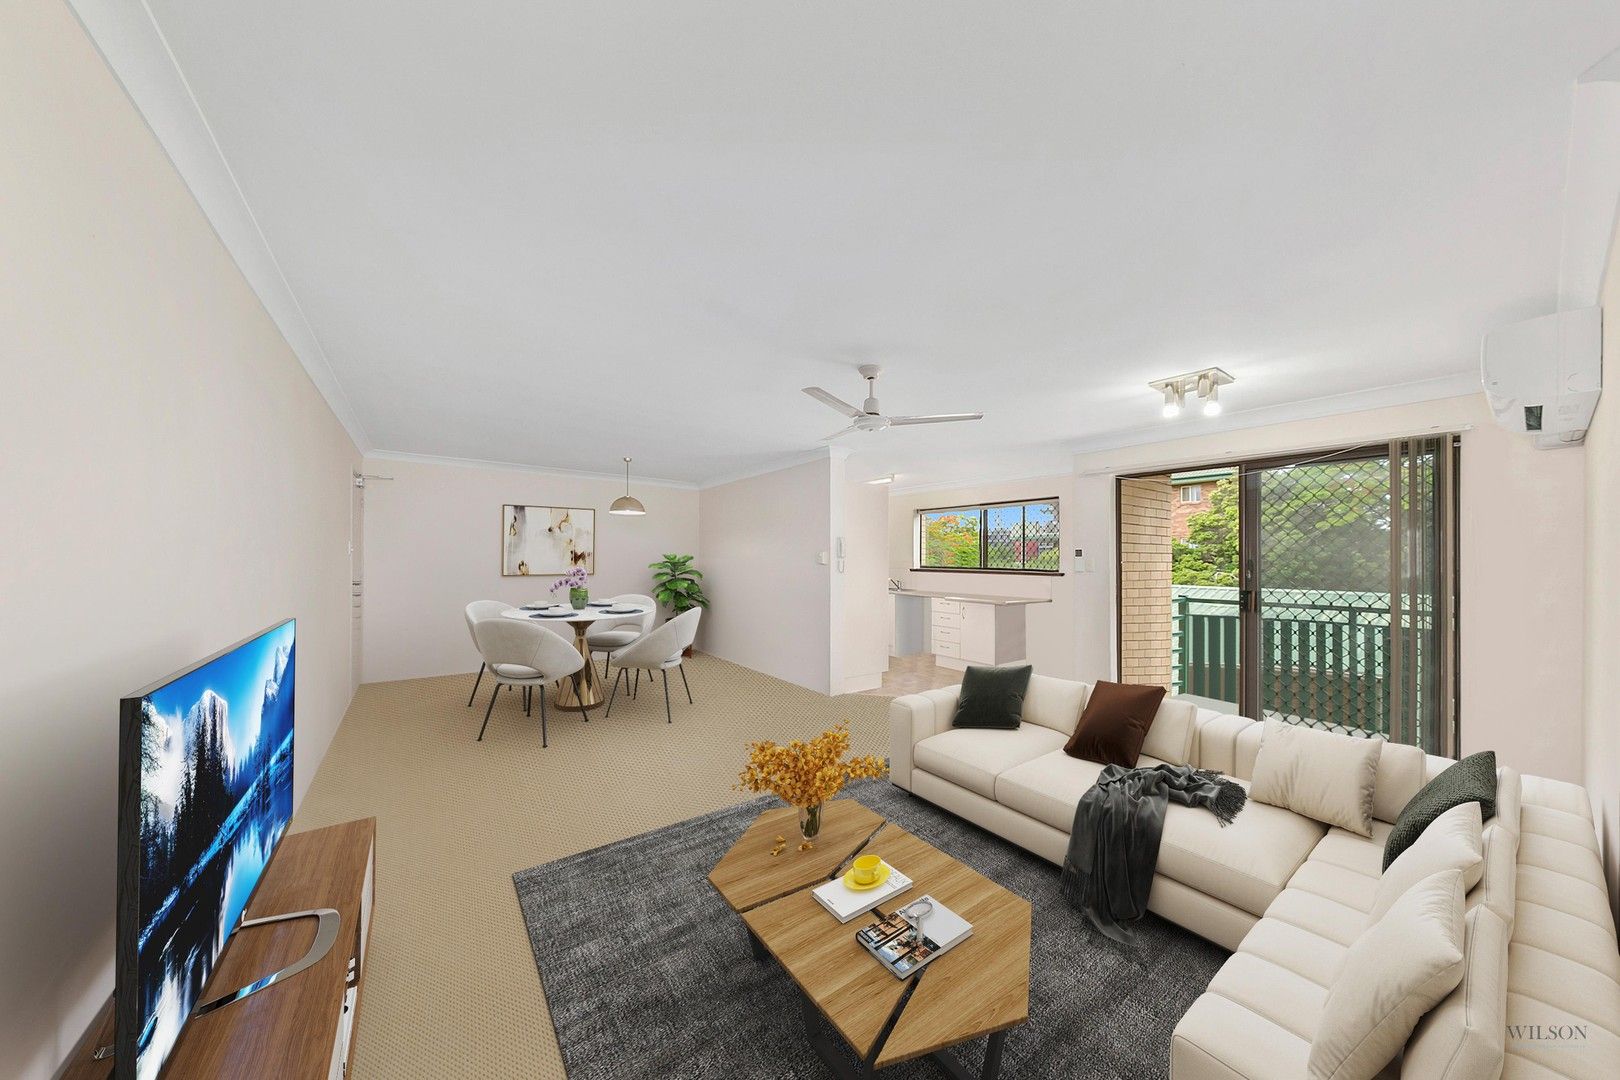 2 bedrooms Apartment / Unit / Flat in 9/123 Central Avenue INDOOROOPILLY QLD, 4068